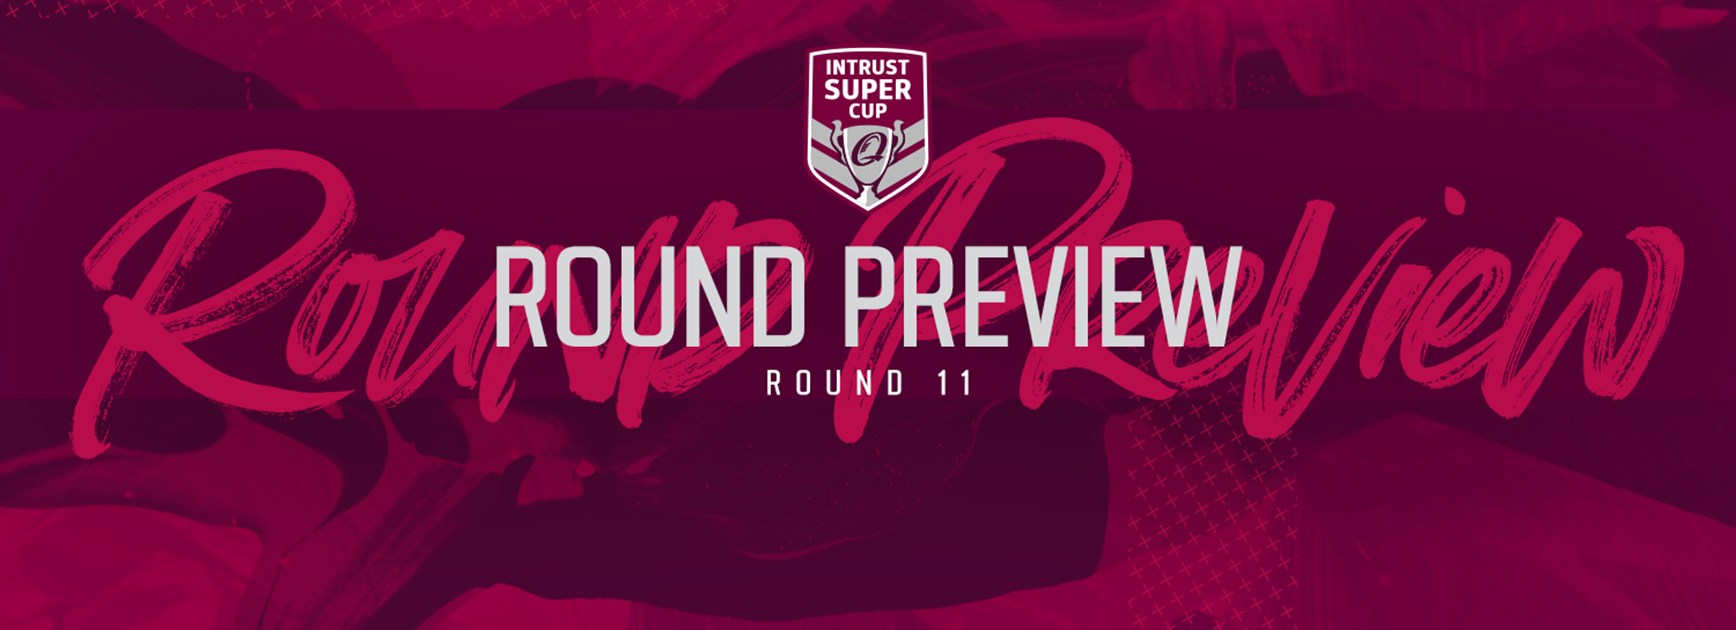 Intrust Super Cup Round 11 preview: Men of League round